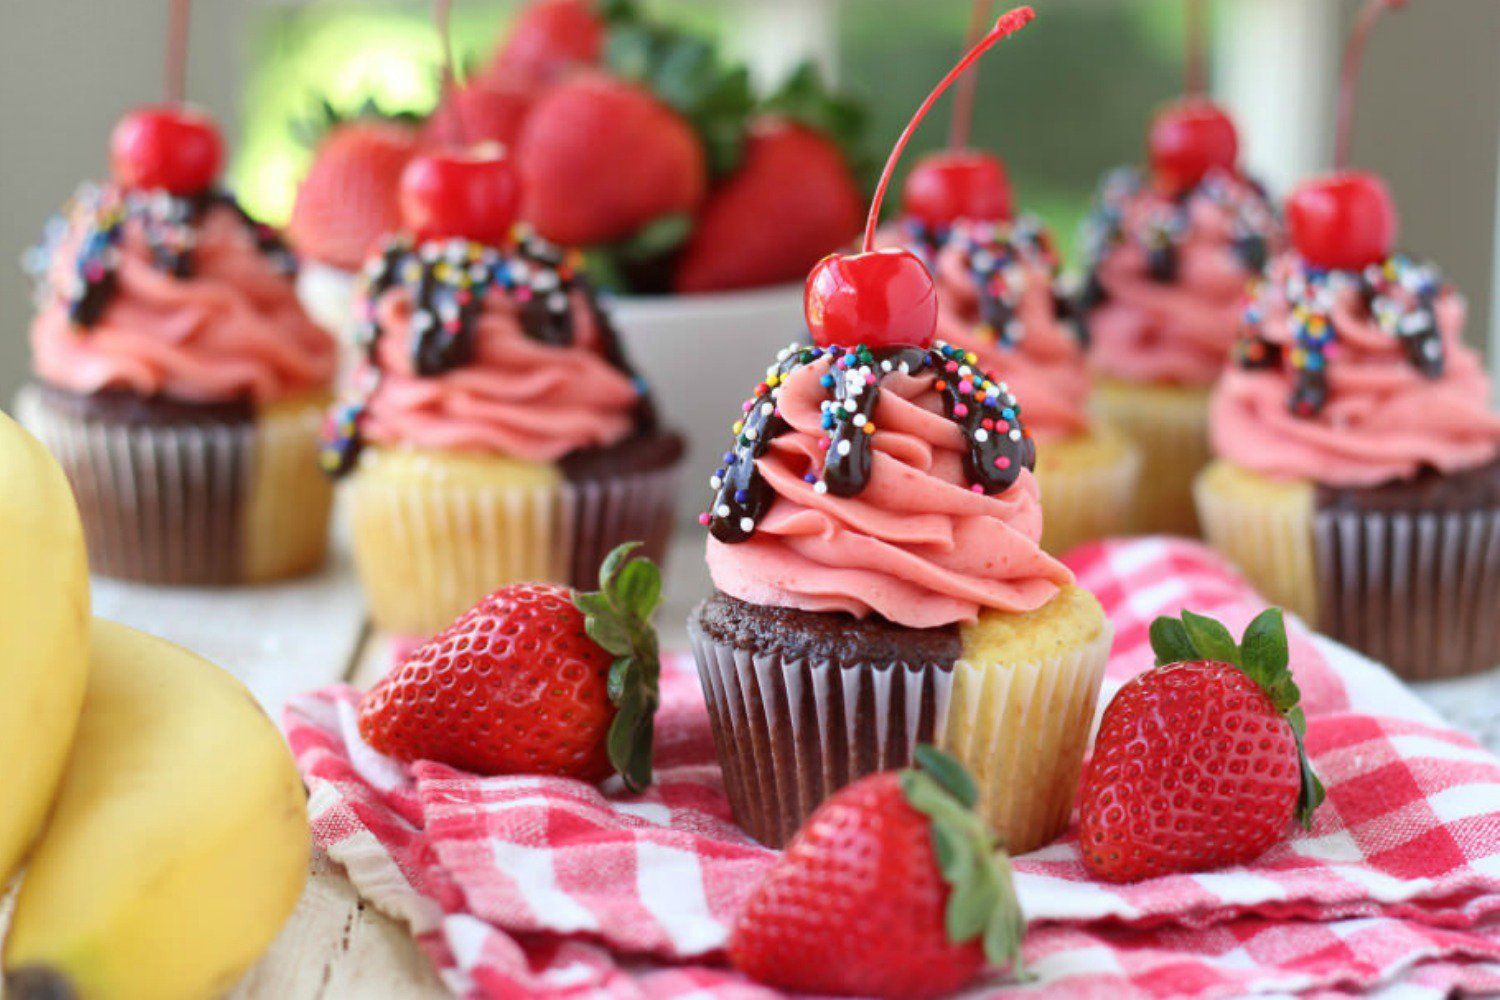 Chocolate cupcakes with strawberry frosting and a cherry on top. - Cupcakes